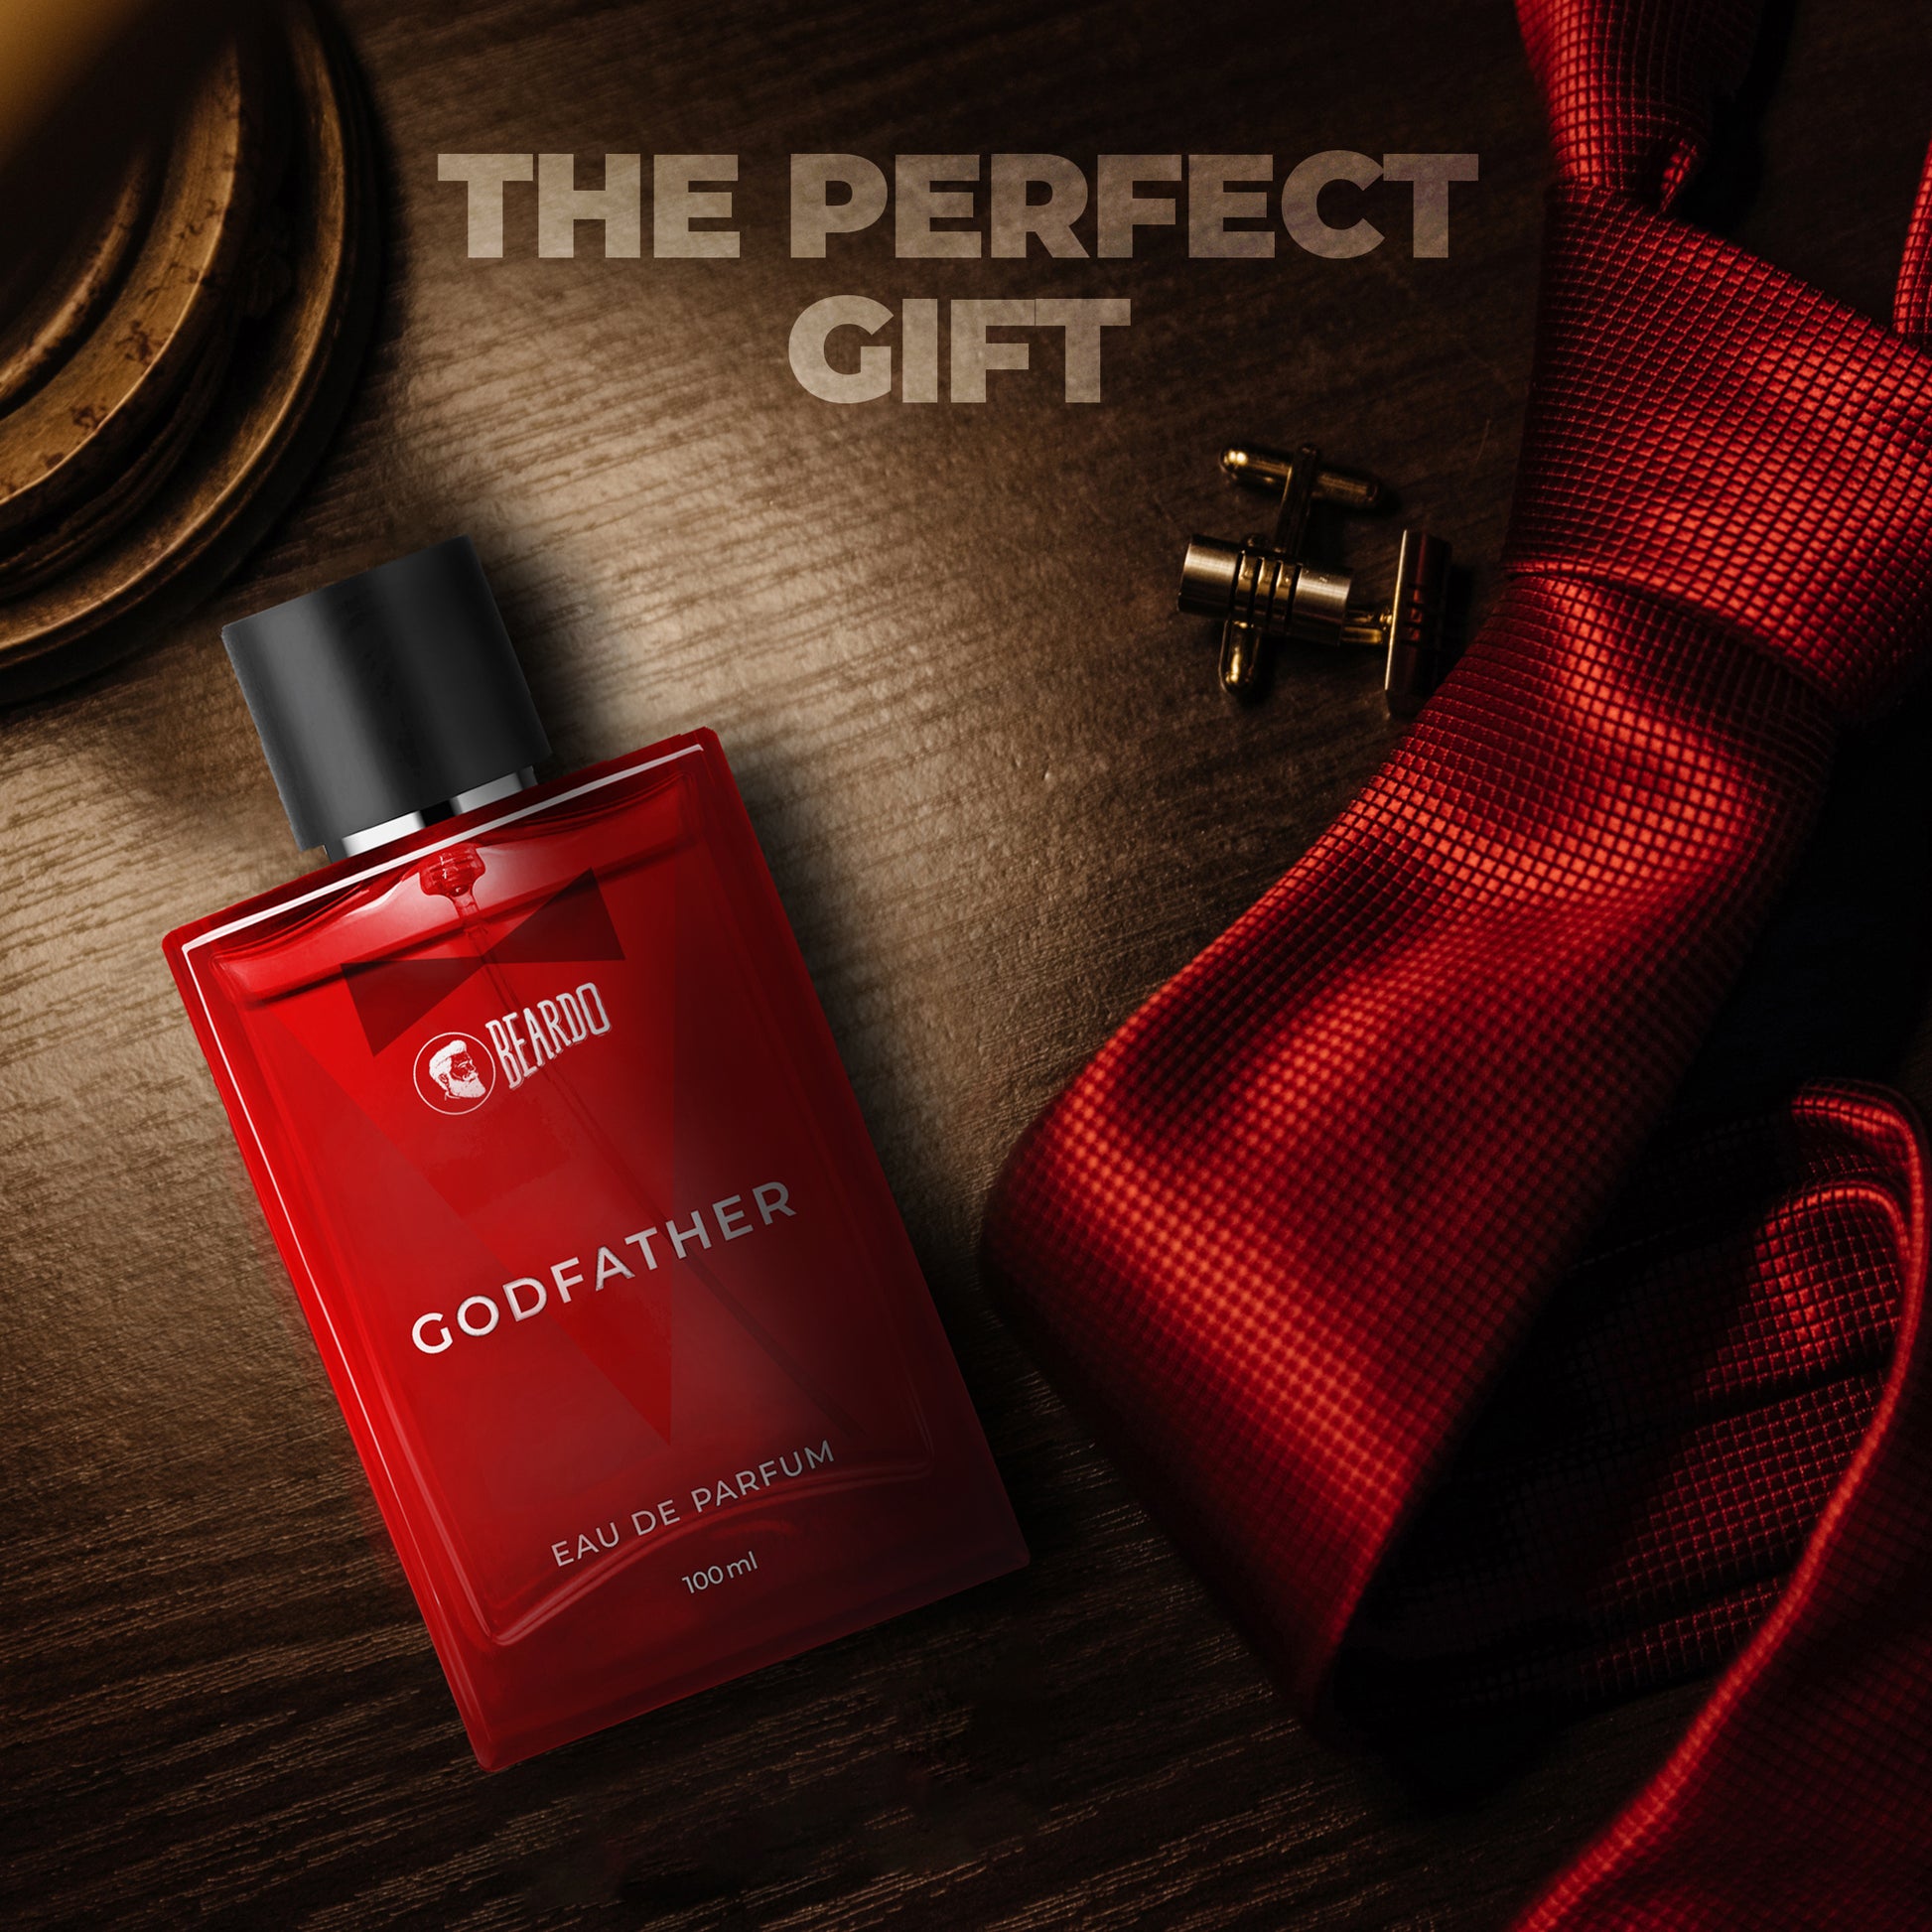 perfume, godfather perfume 100ml price, beardo godfather perfume for men, strong perfume, strong scent, best mens cologne 2022, best cologne for men 2022, gifts for men, gifts for him